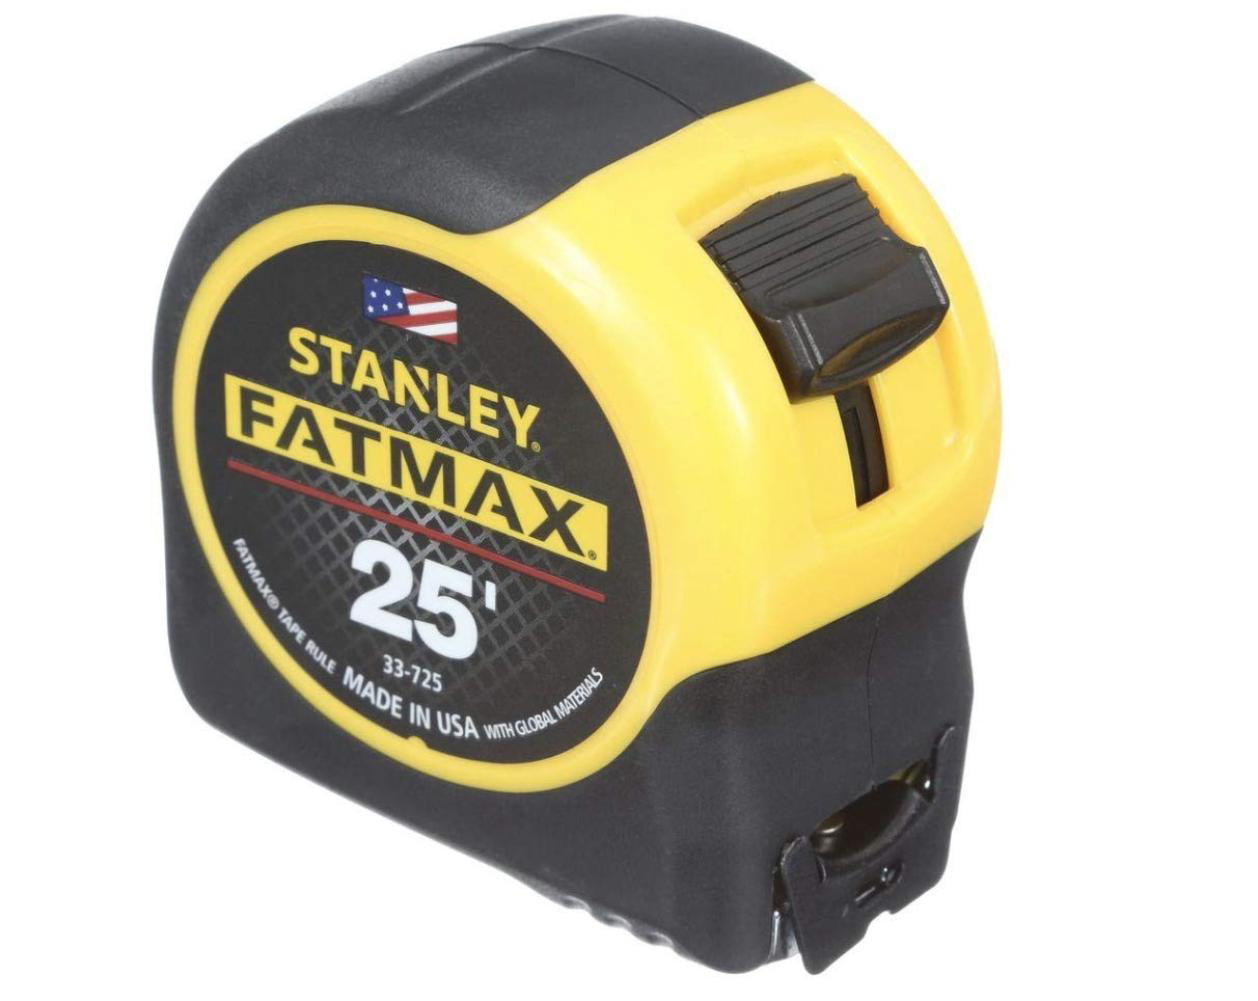 Stanley 33-725 25' x 1-1/4" FatMax Tape Rule Reinforced with Blade Armor Coating 